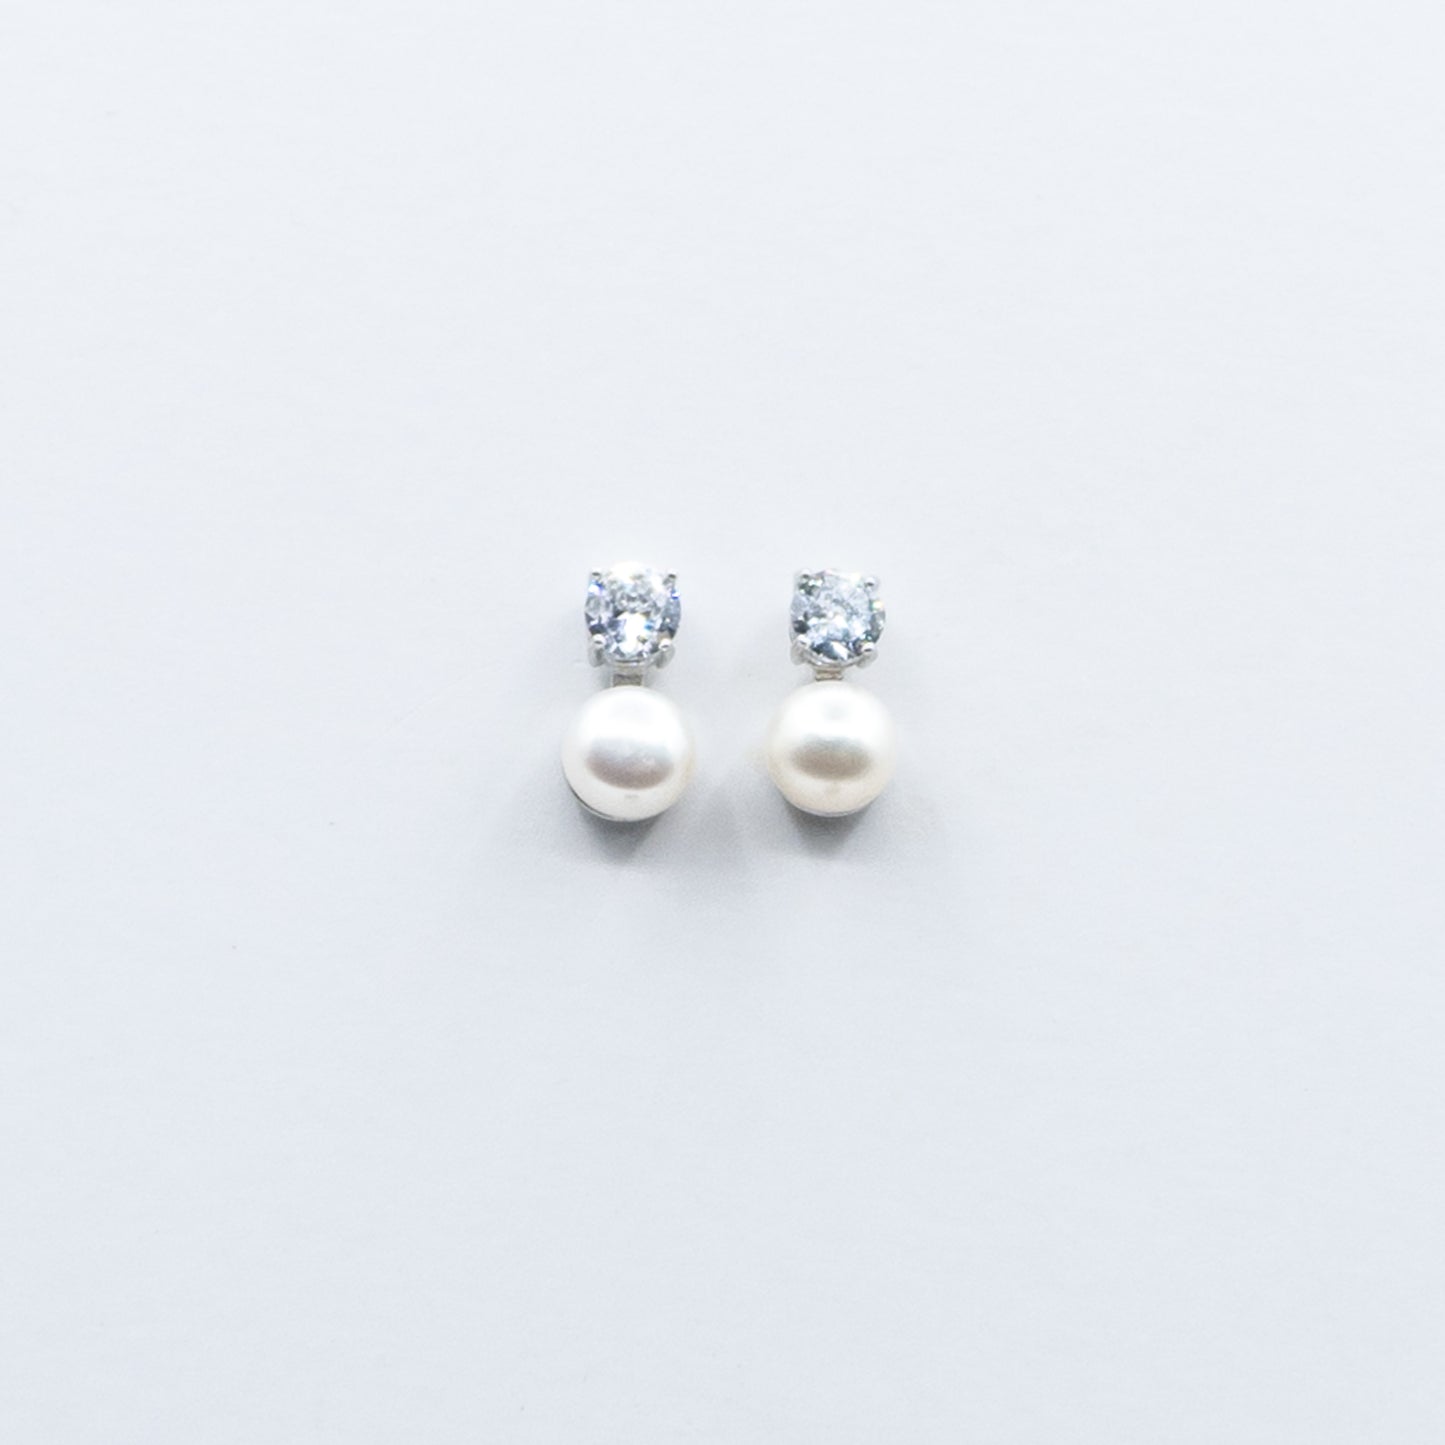 DK-925-144 sterling silver pearl studs with CZ